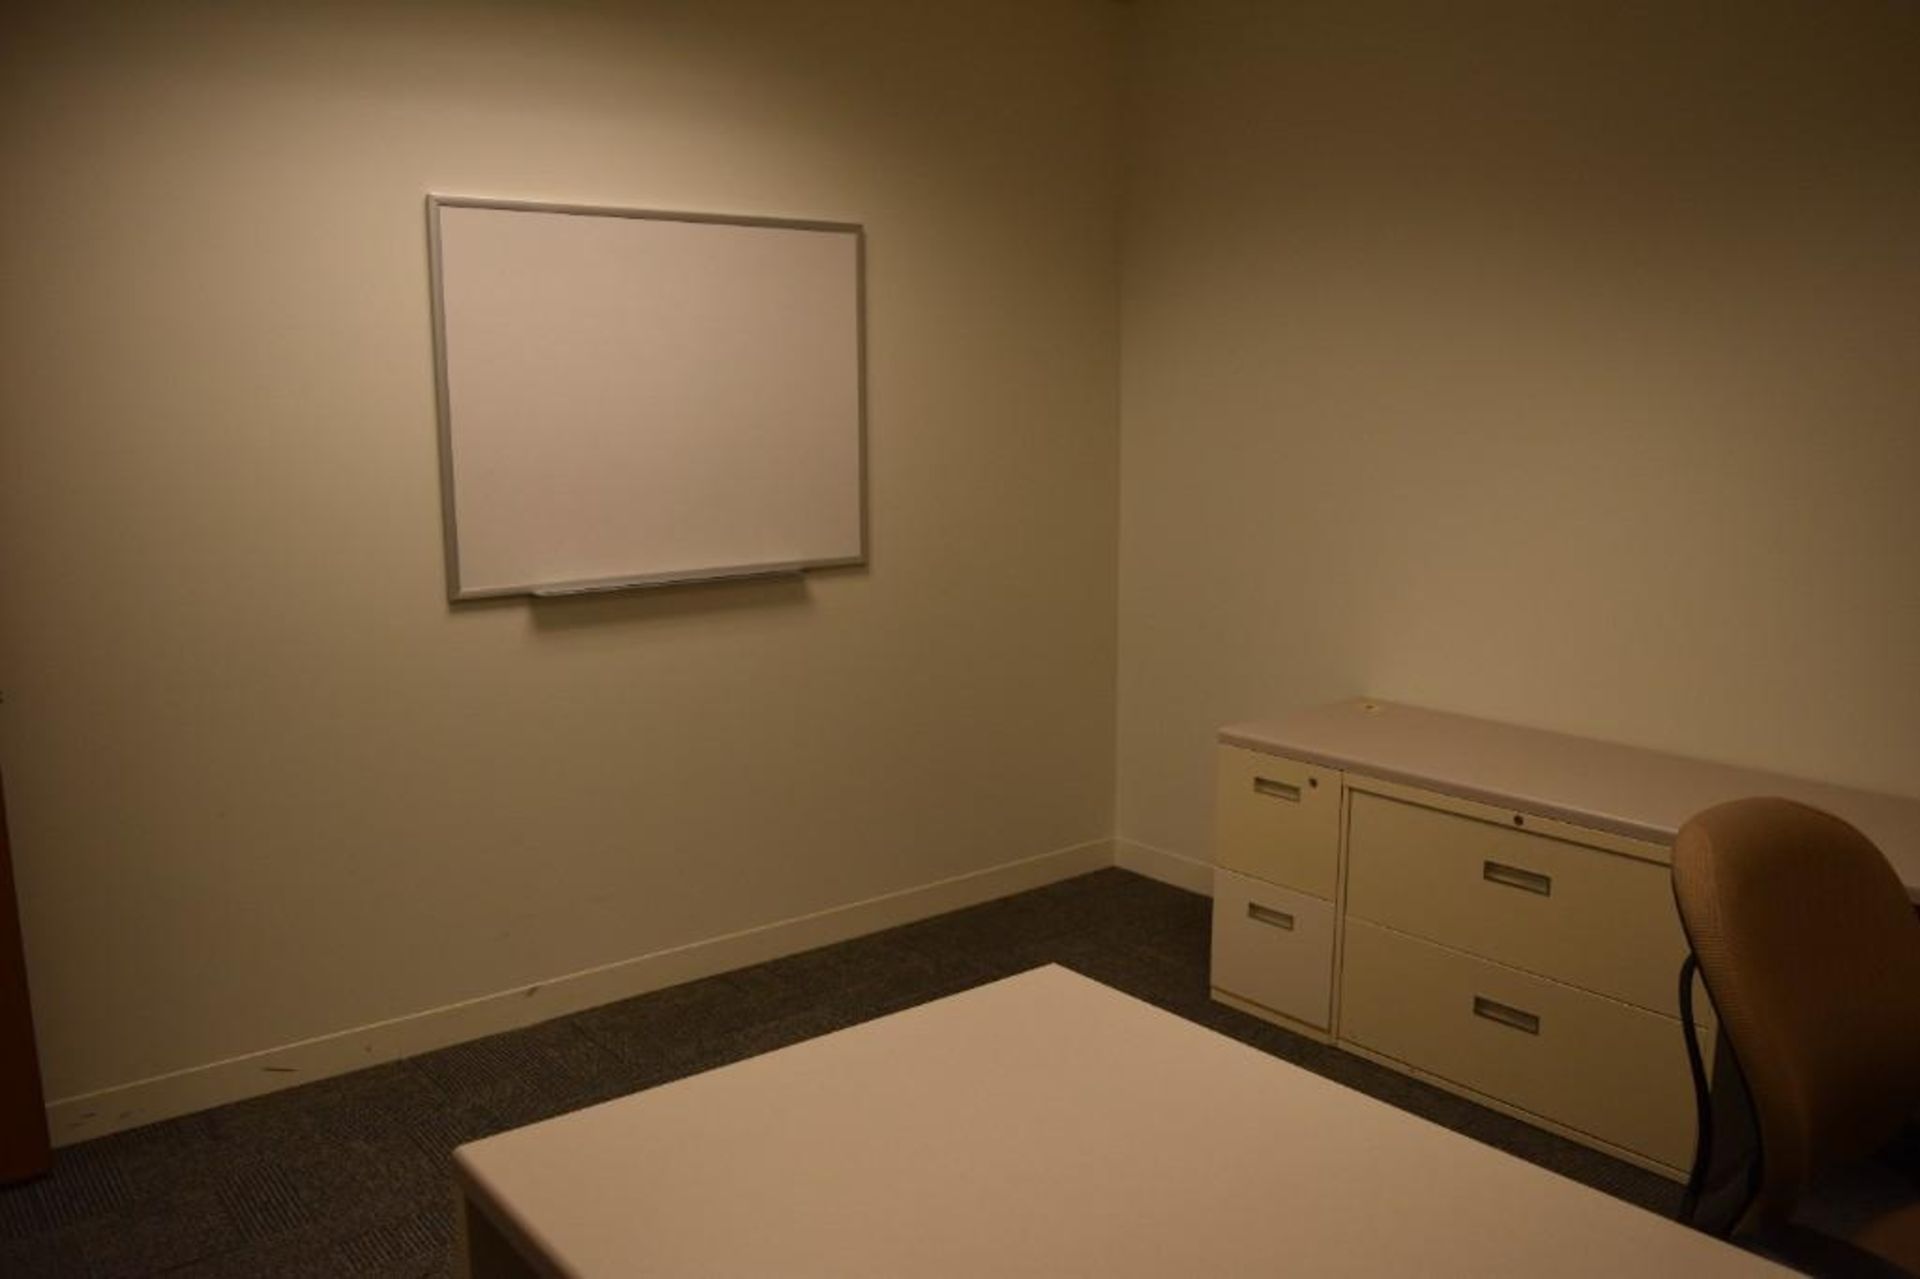 Lot c/o: (26) Assorted Office Suites - Relocated for ease of removal - Image 49 of 106